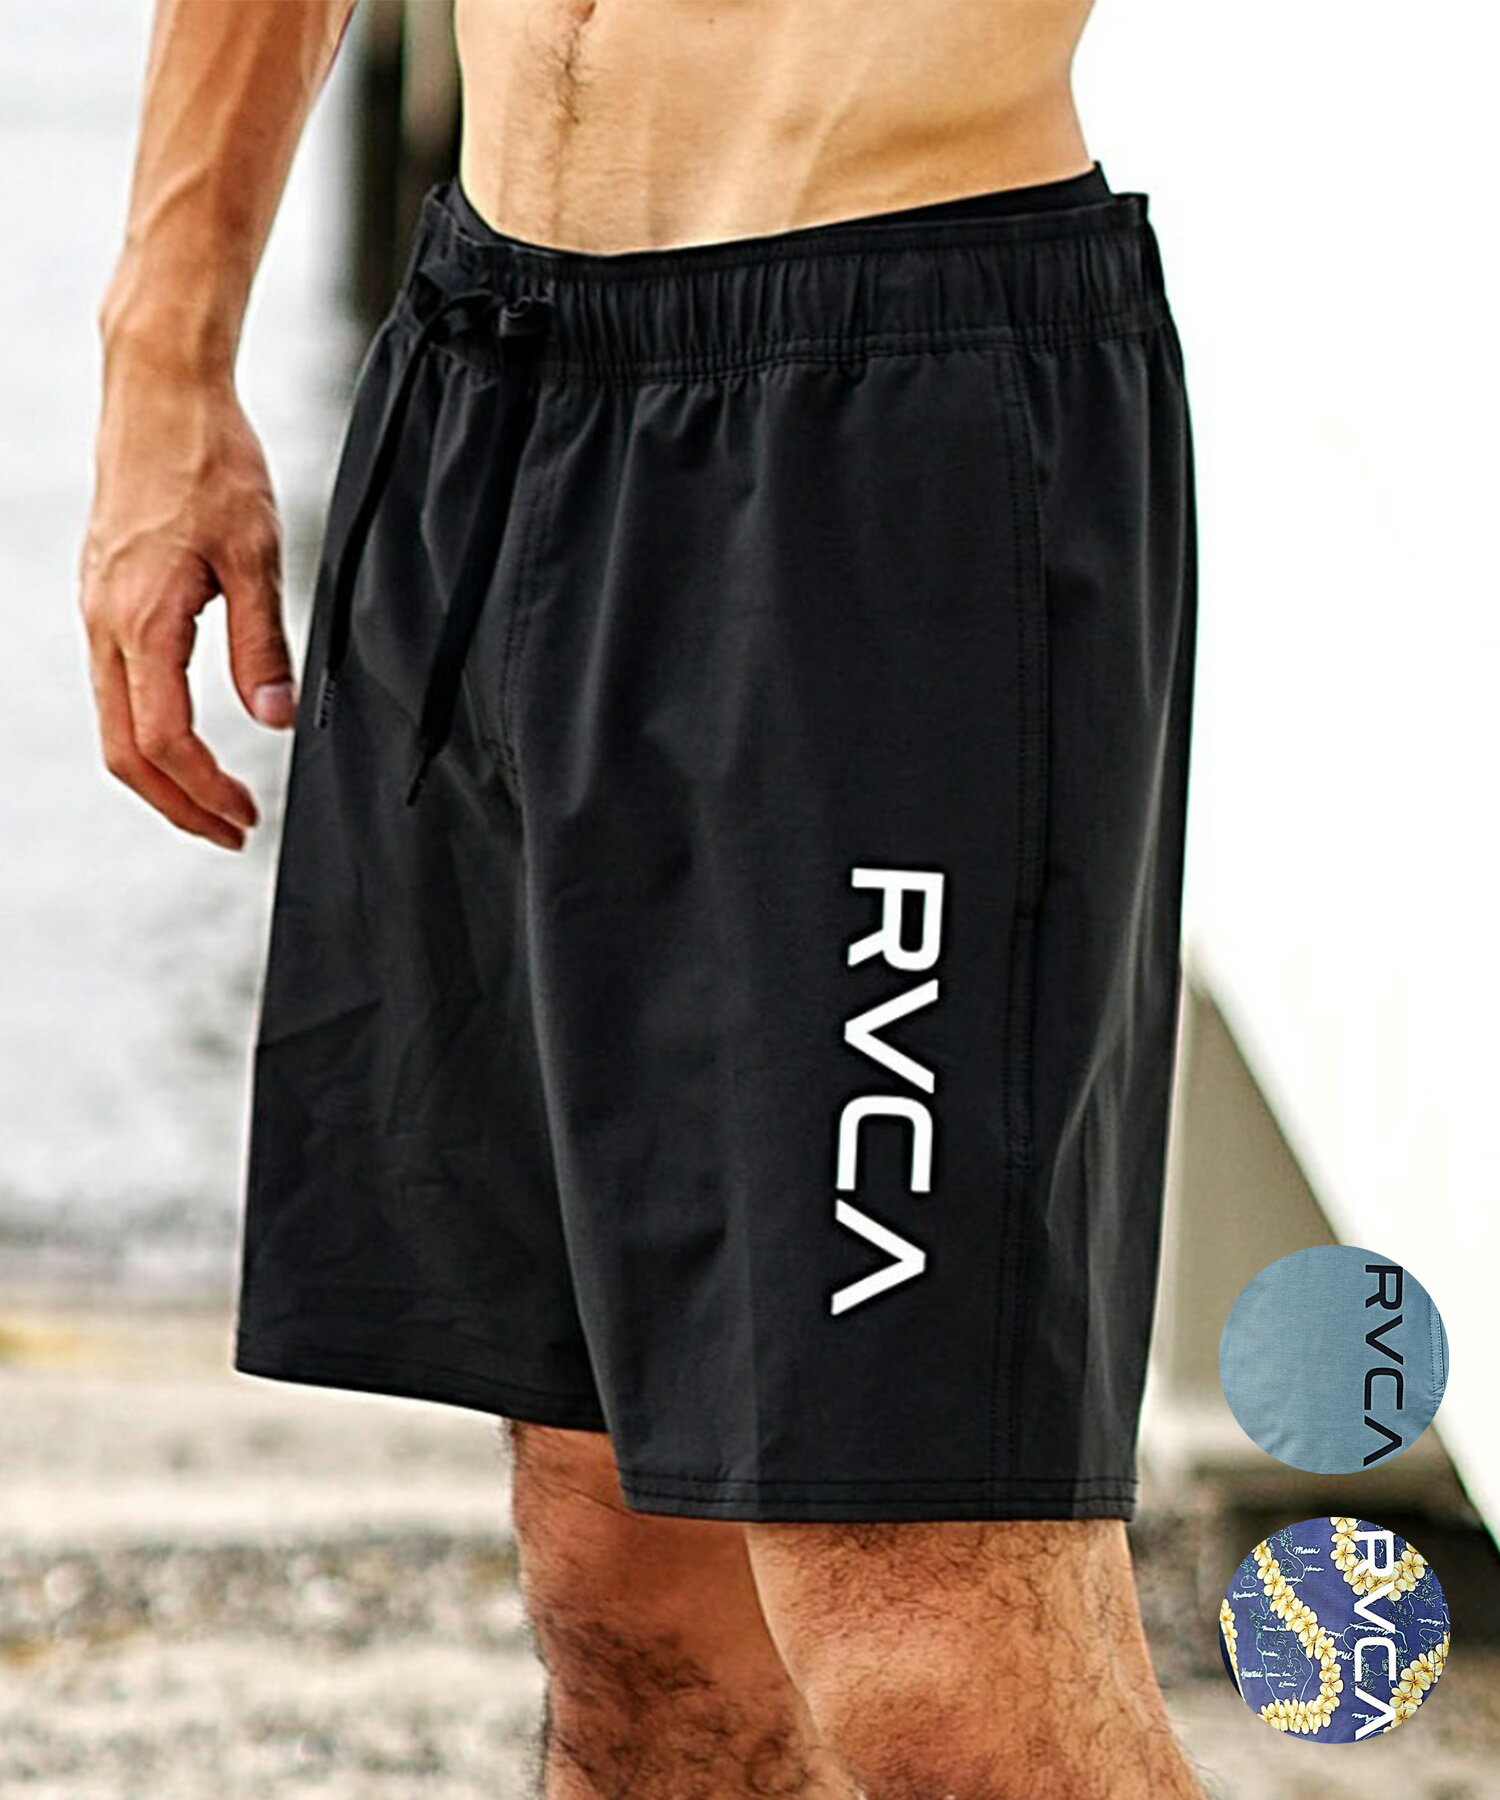 RVCA [J Y [eBeBV[c SV[c T[tV[c  BE041-526